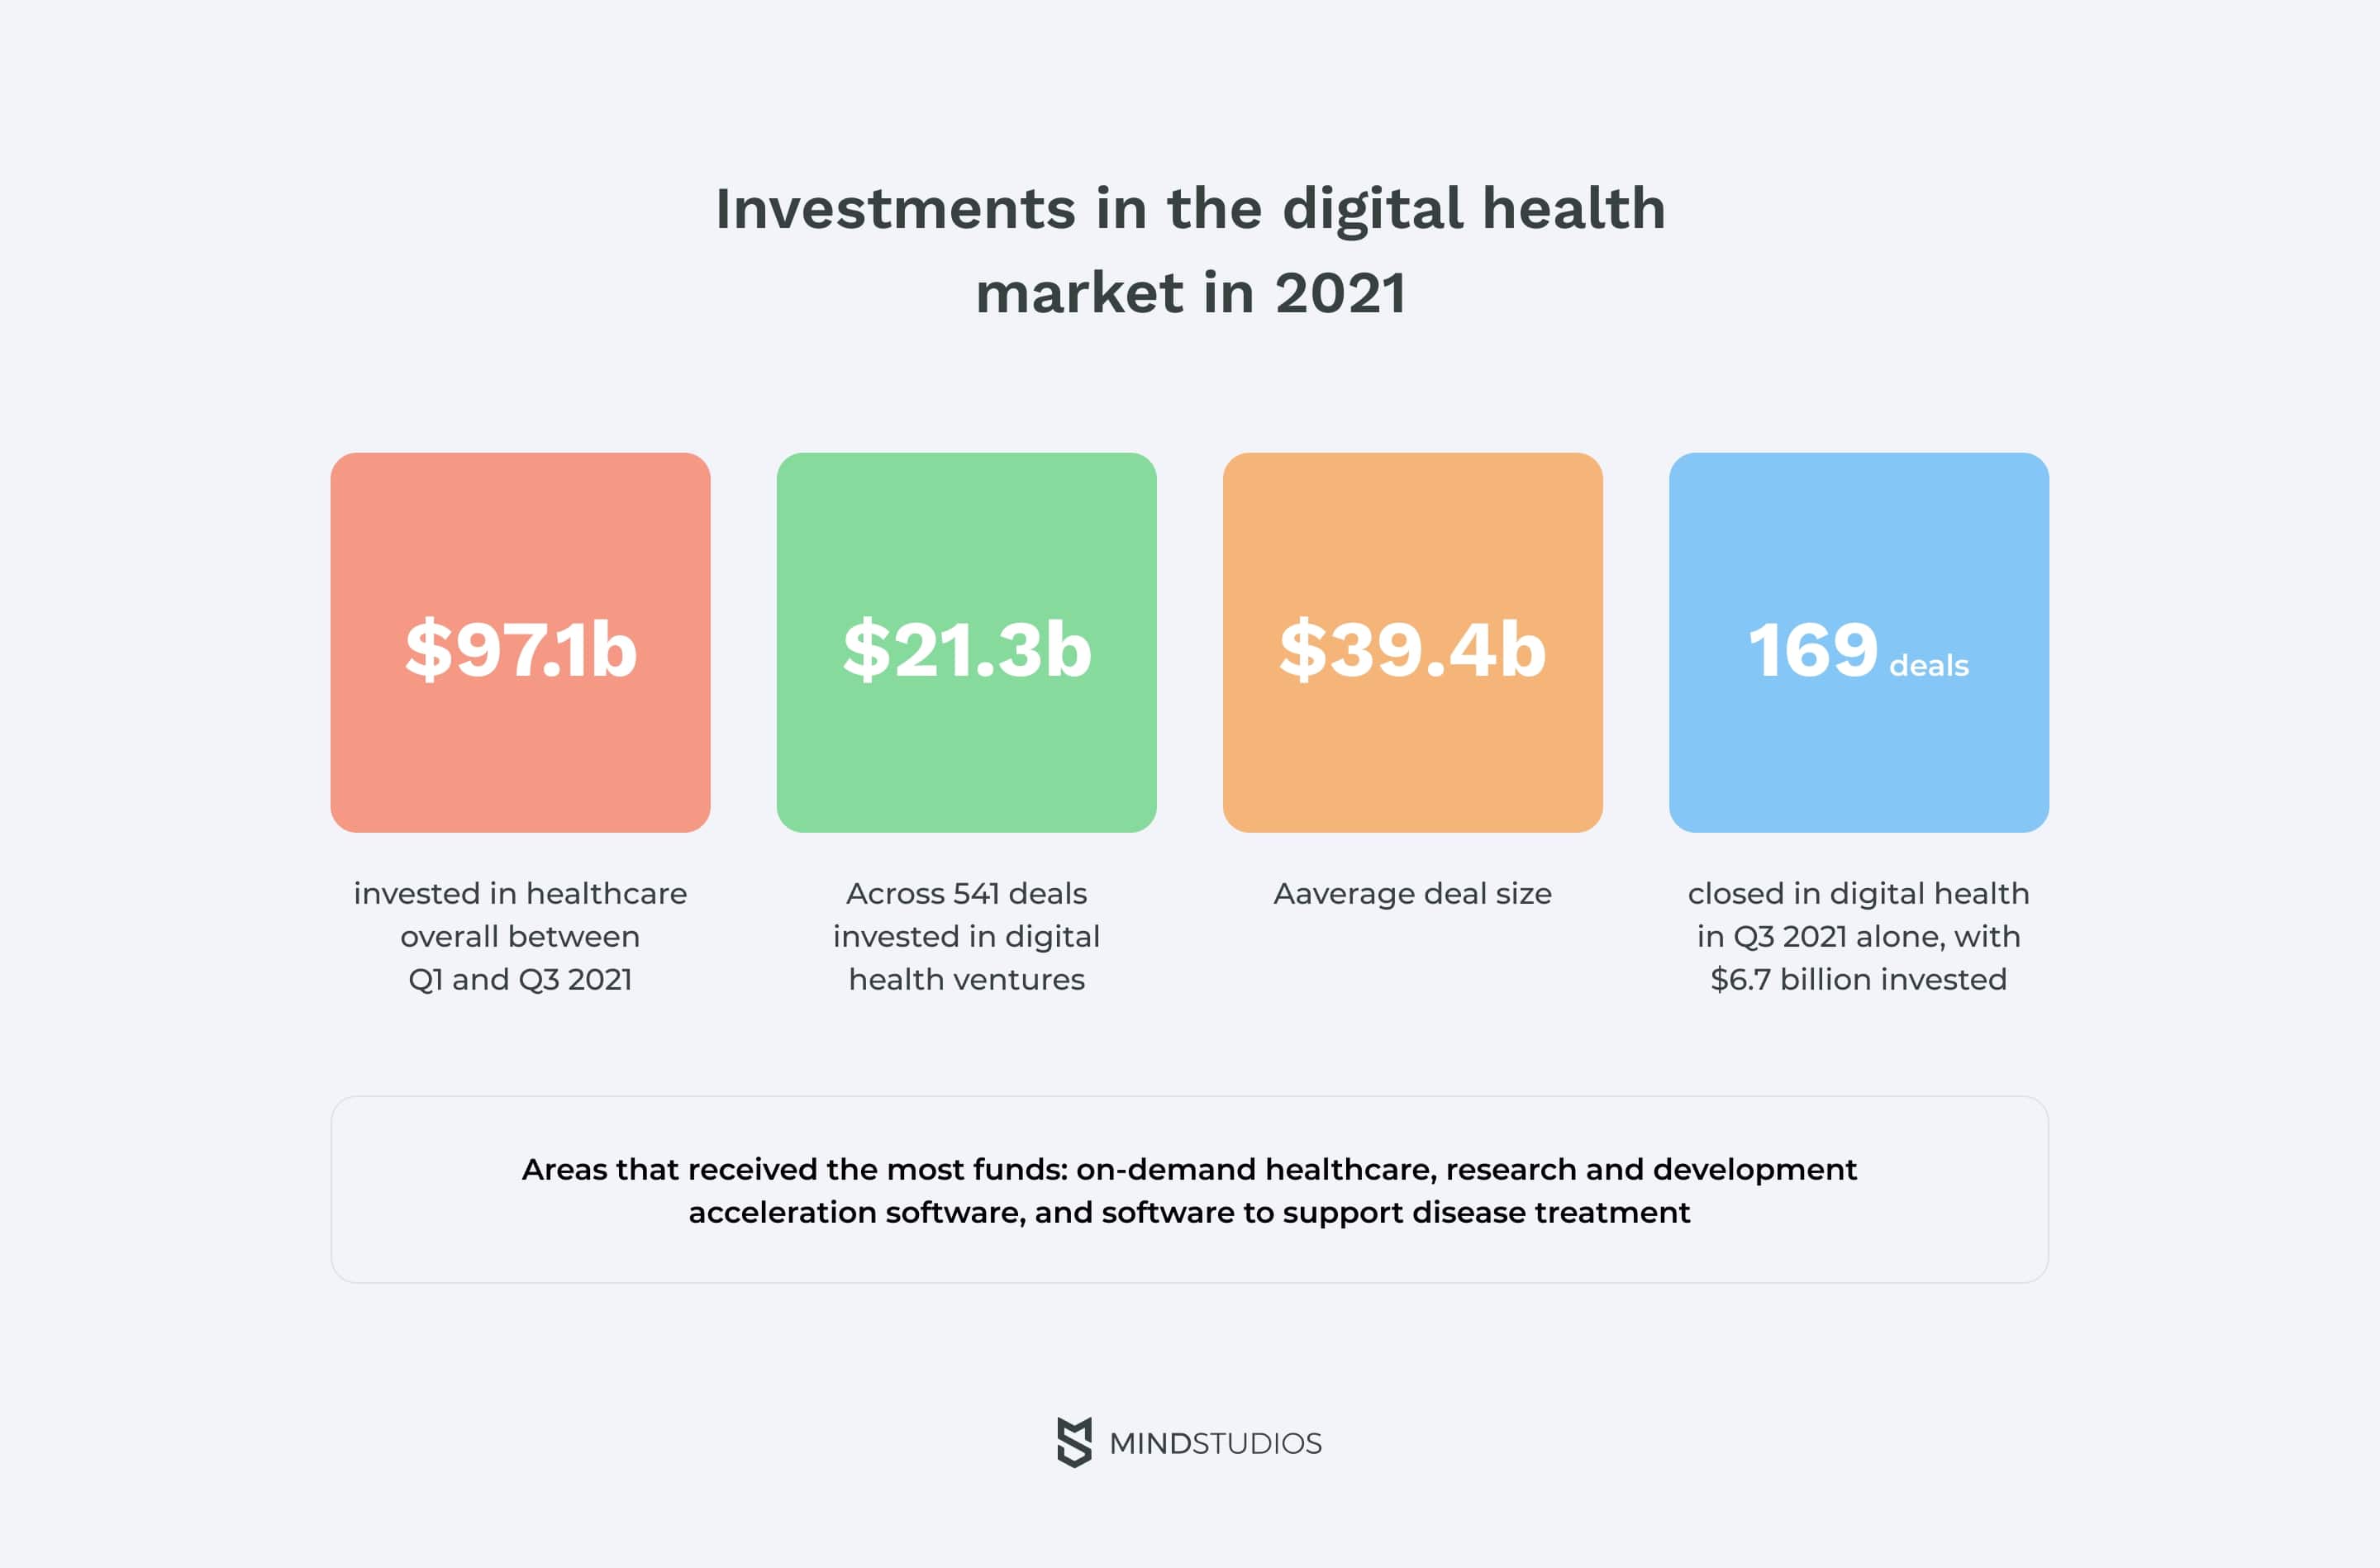 Investments in the digital health market in 2021